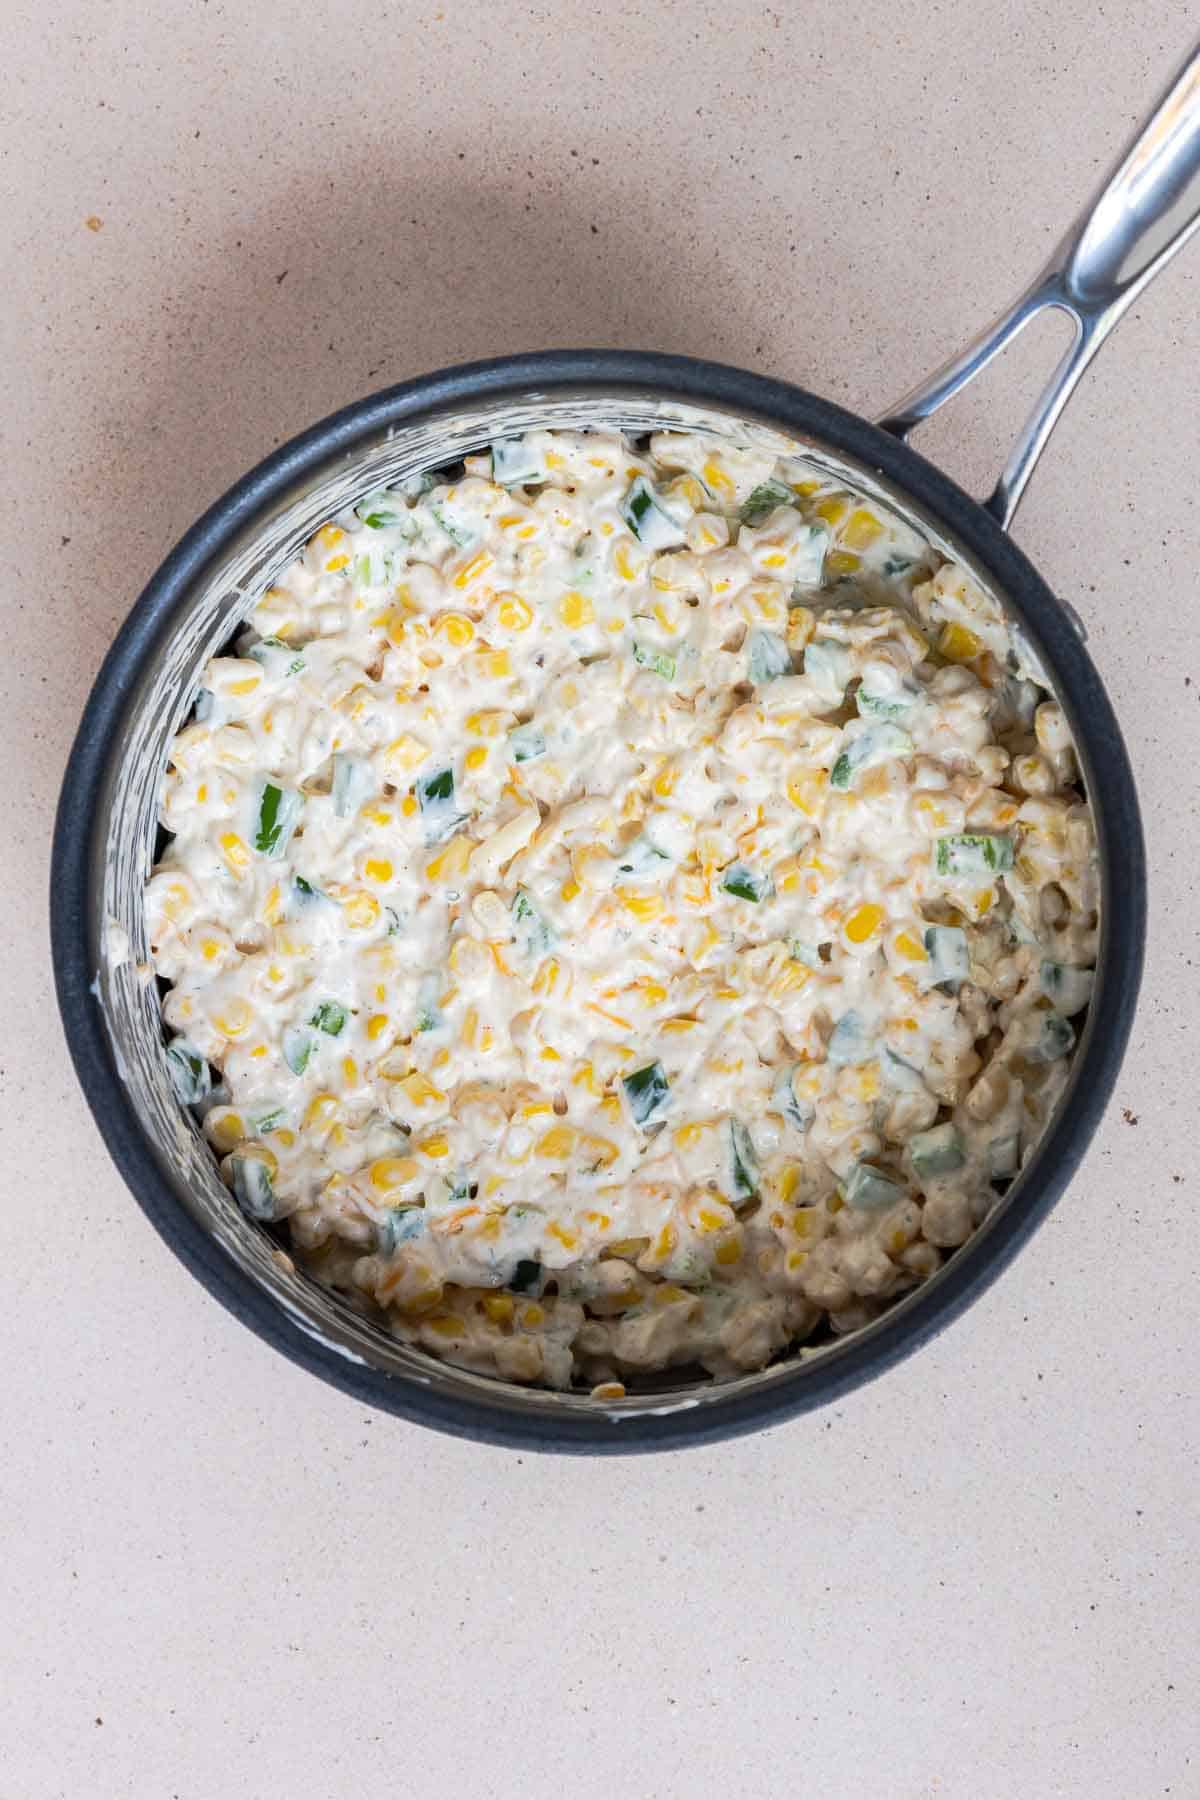 The corn casserole ingredients are coated evenly in the cream cheese mixture in the saucepan.